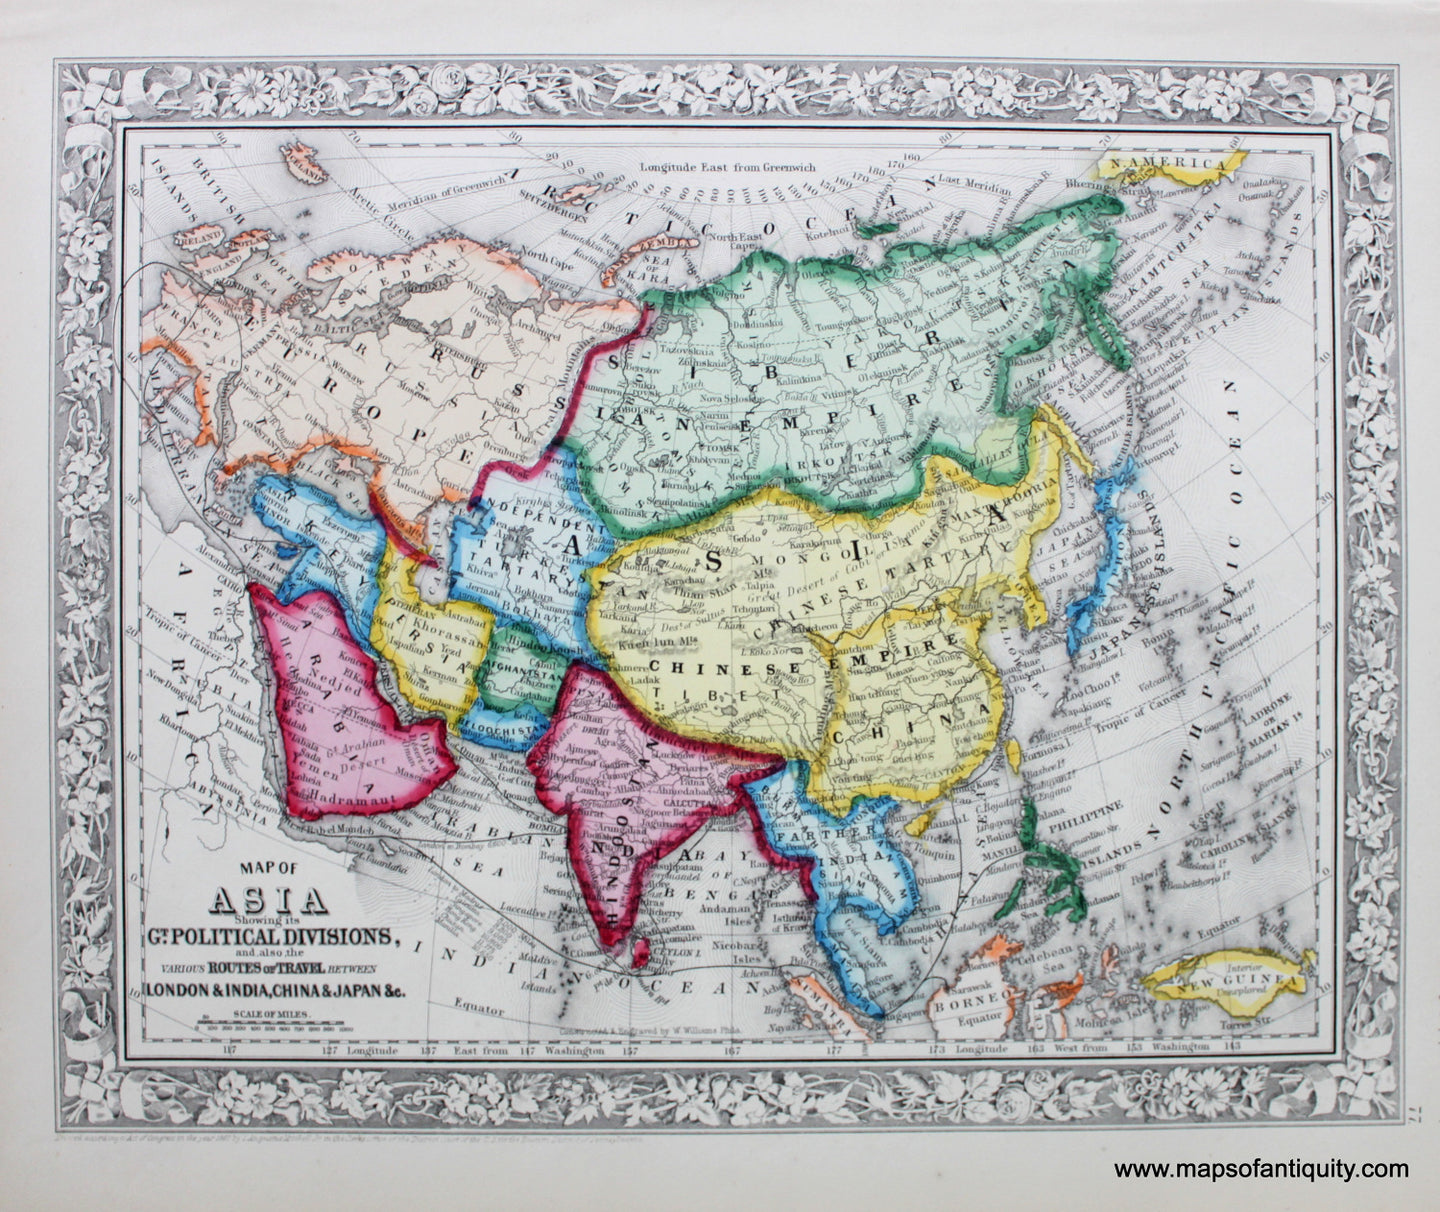 Antique-Hand-Colored-Map-Map-of-Asia-Showing-its-Gt.-Political-Divisions-and-also-the-Various-Routes-of-Travel-Between-London-and-India-China-and-Japan-etc.-Asia-Asia-1860-Mitchell-Maps-Of-Antiquity